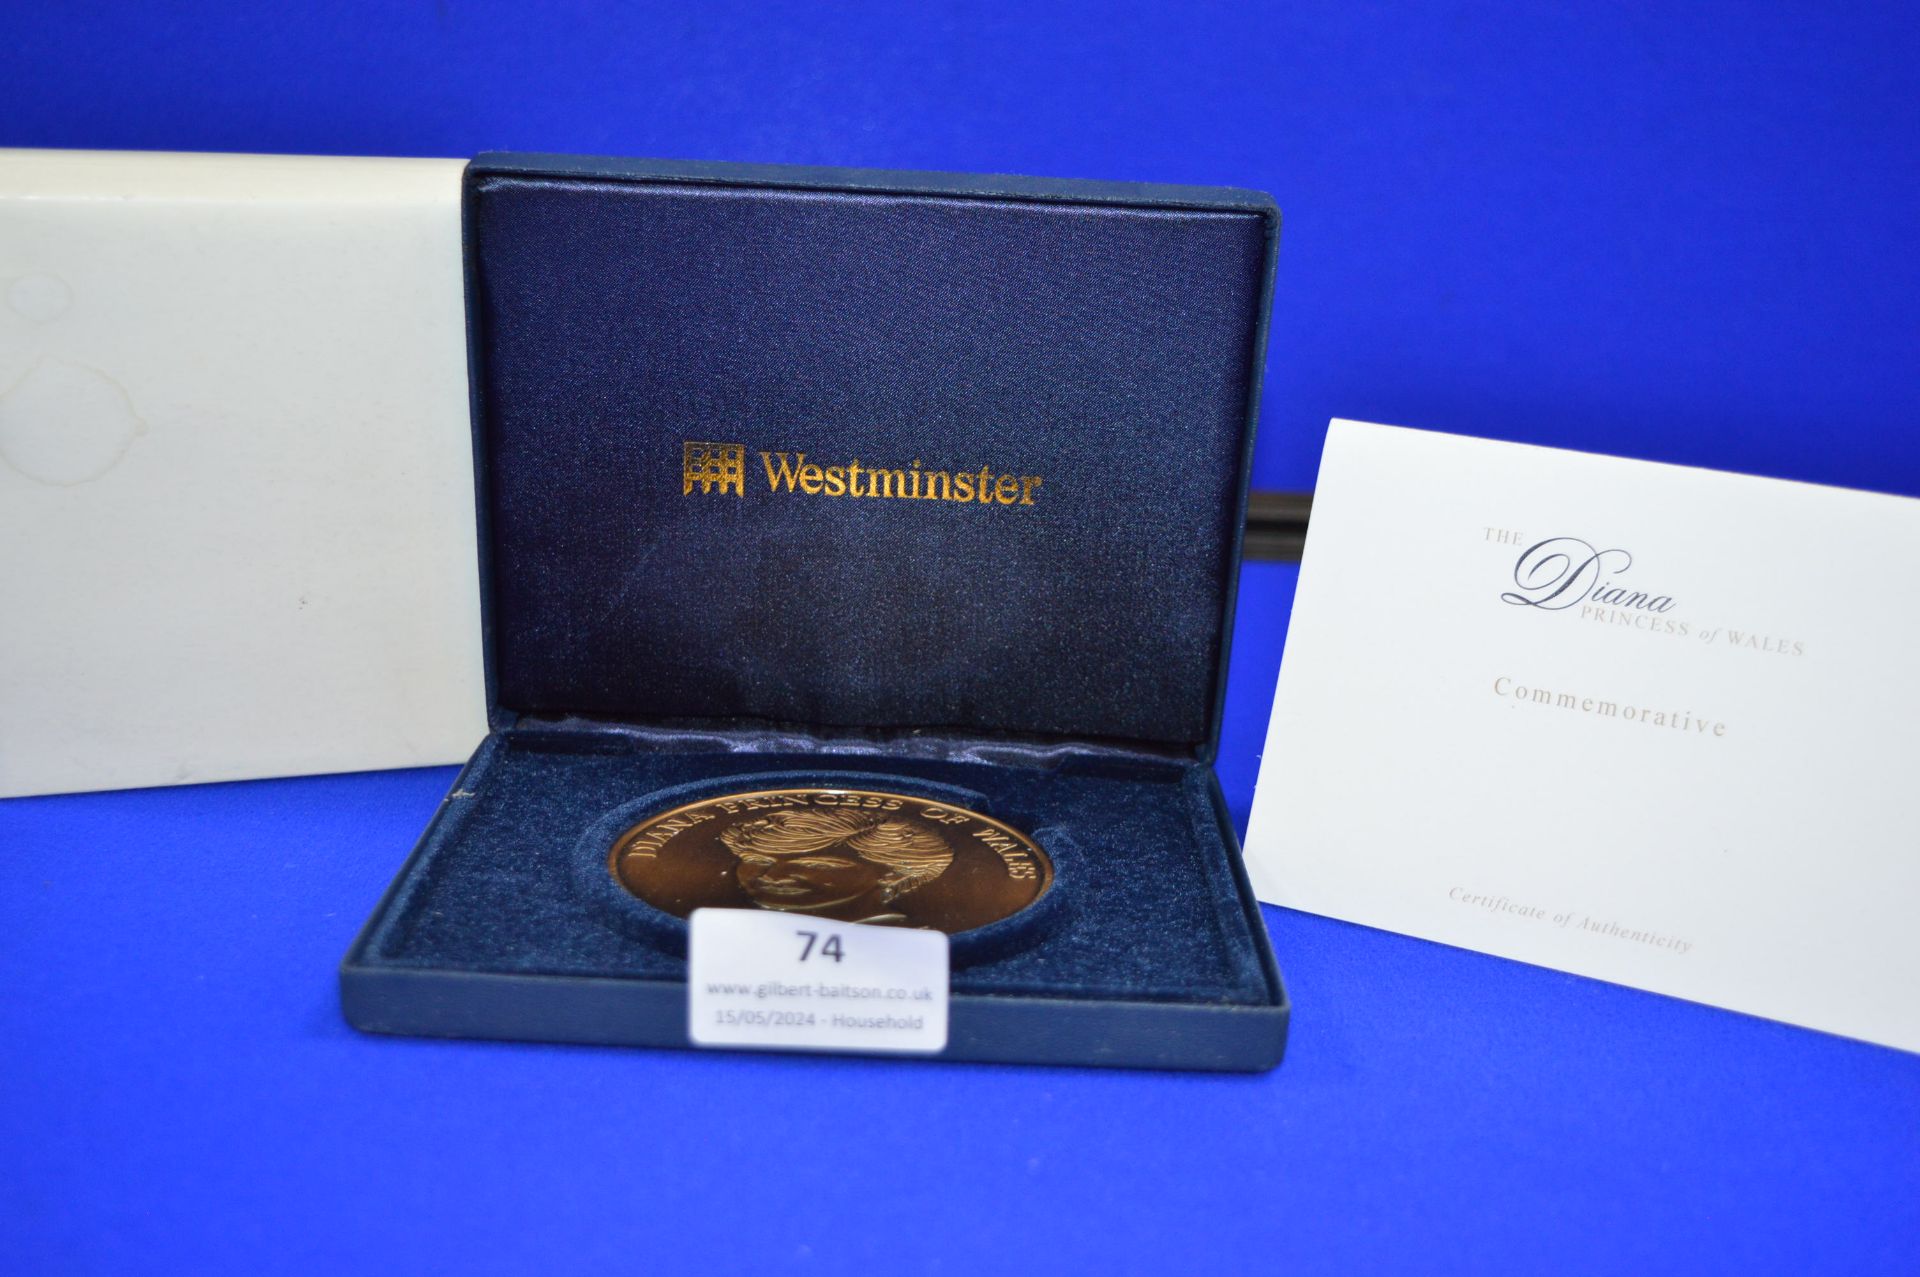 Diana Princess of Wales Commemorative Coin